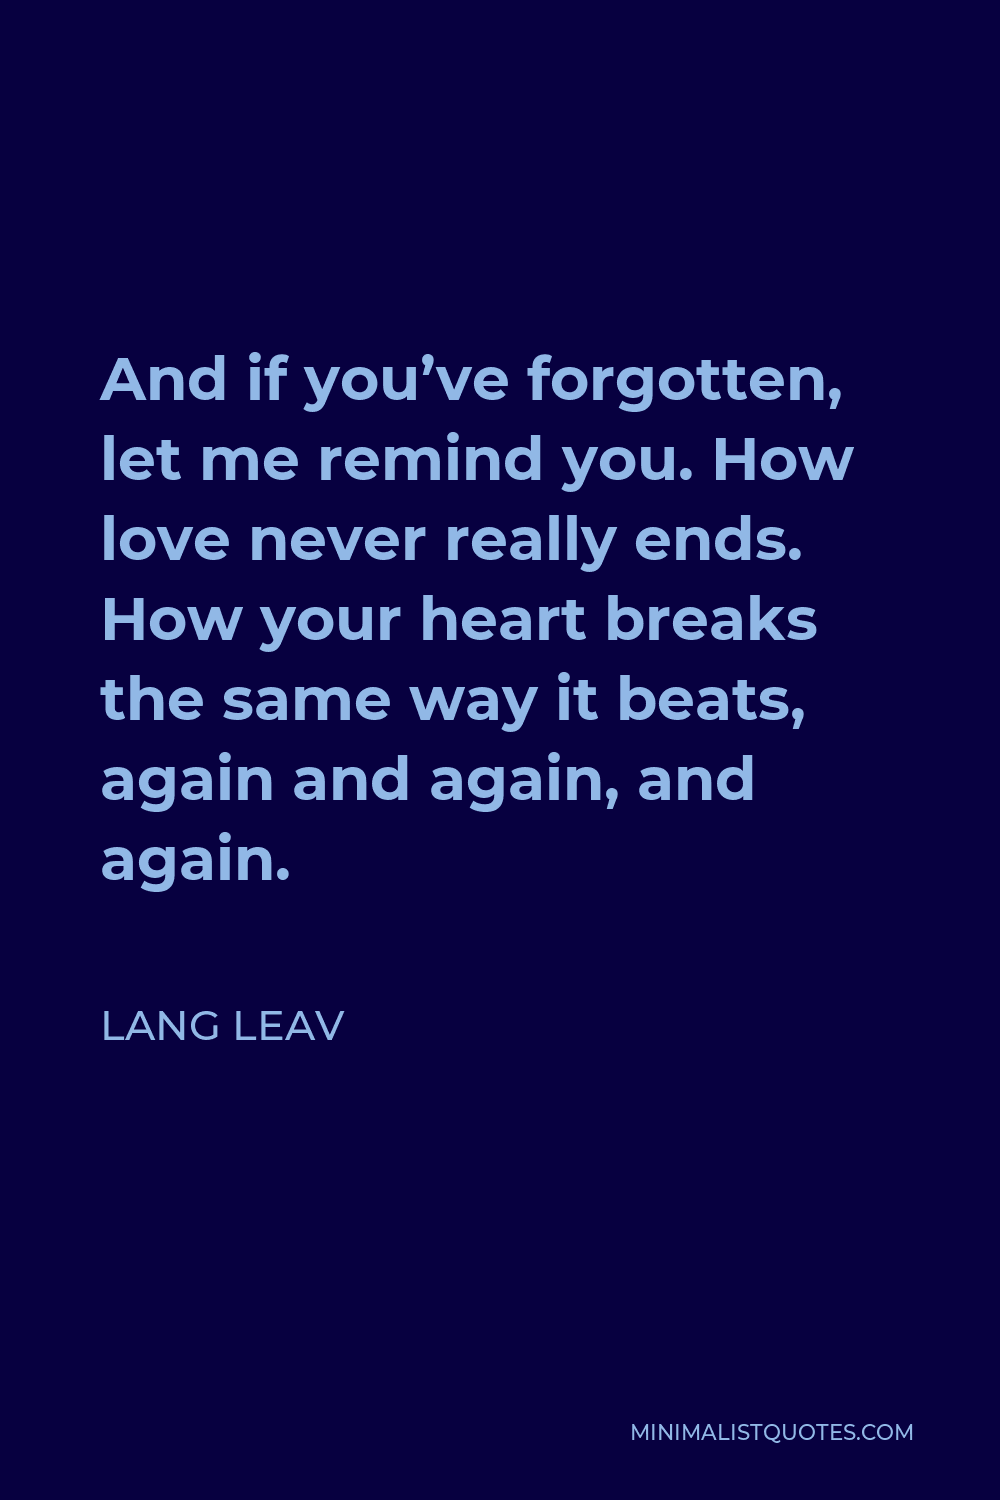 Lang Leav Quote - And if you’ve forgotten, let me remind you. How love never really ends. How your heart breaks the same way it beats, again and again, and again.